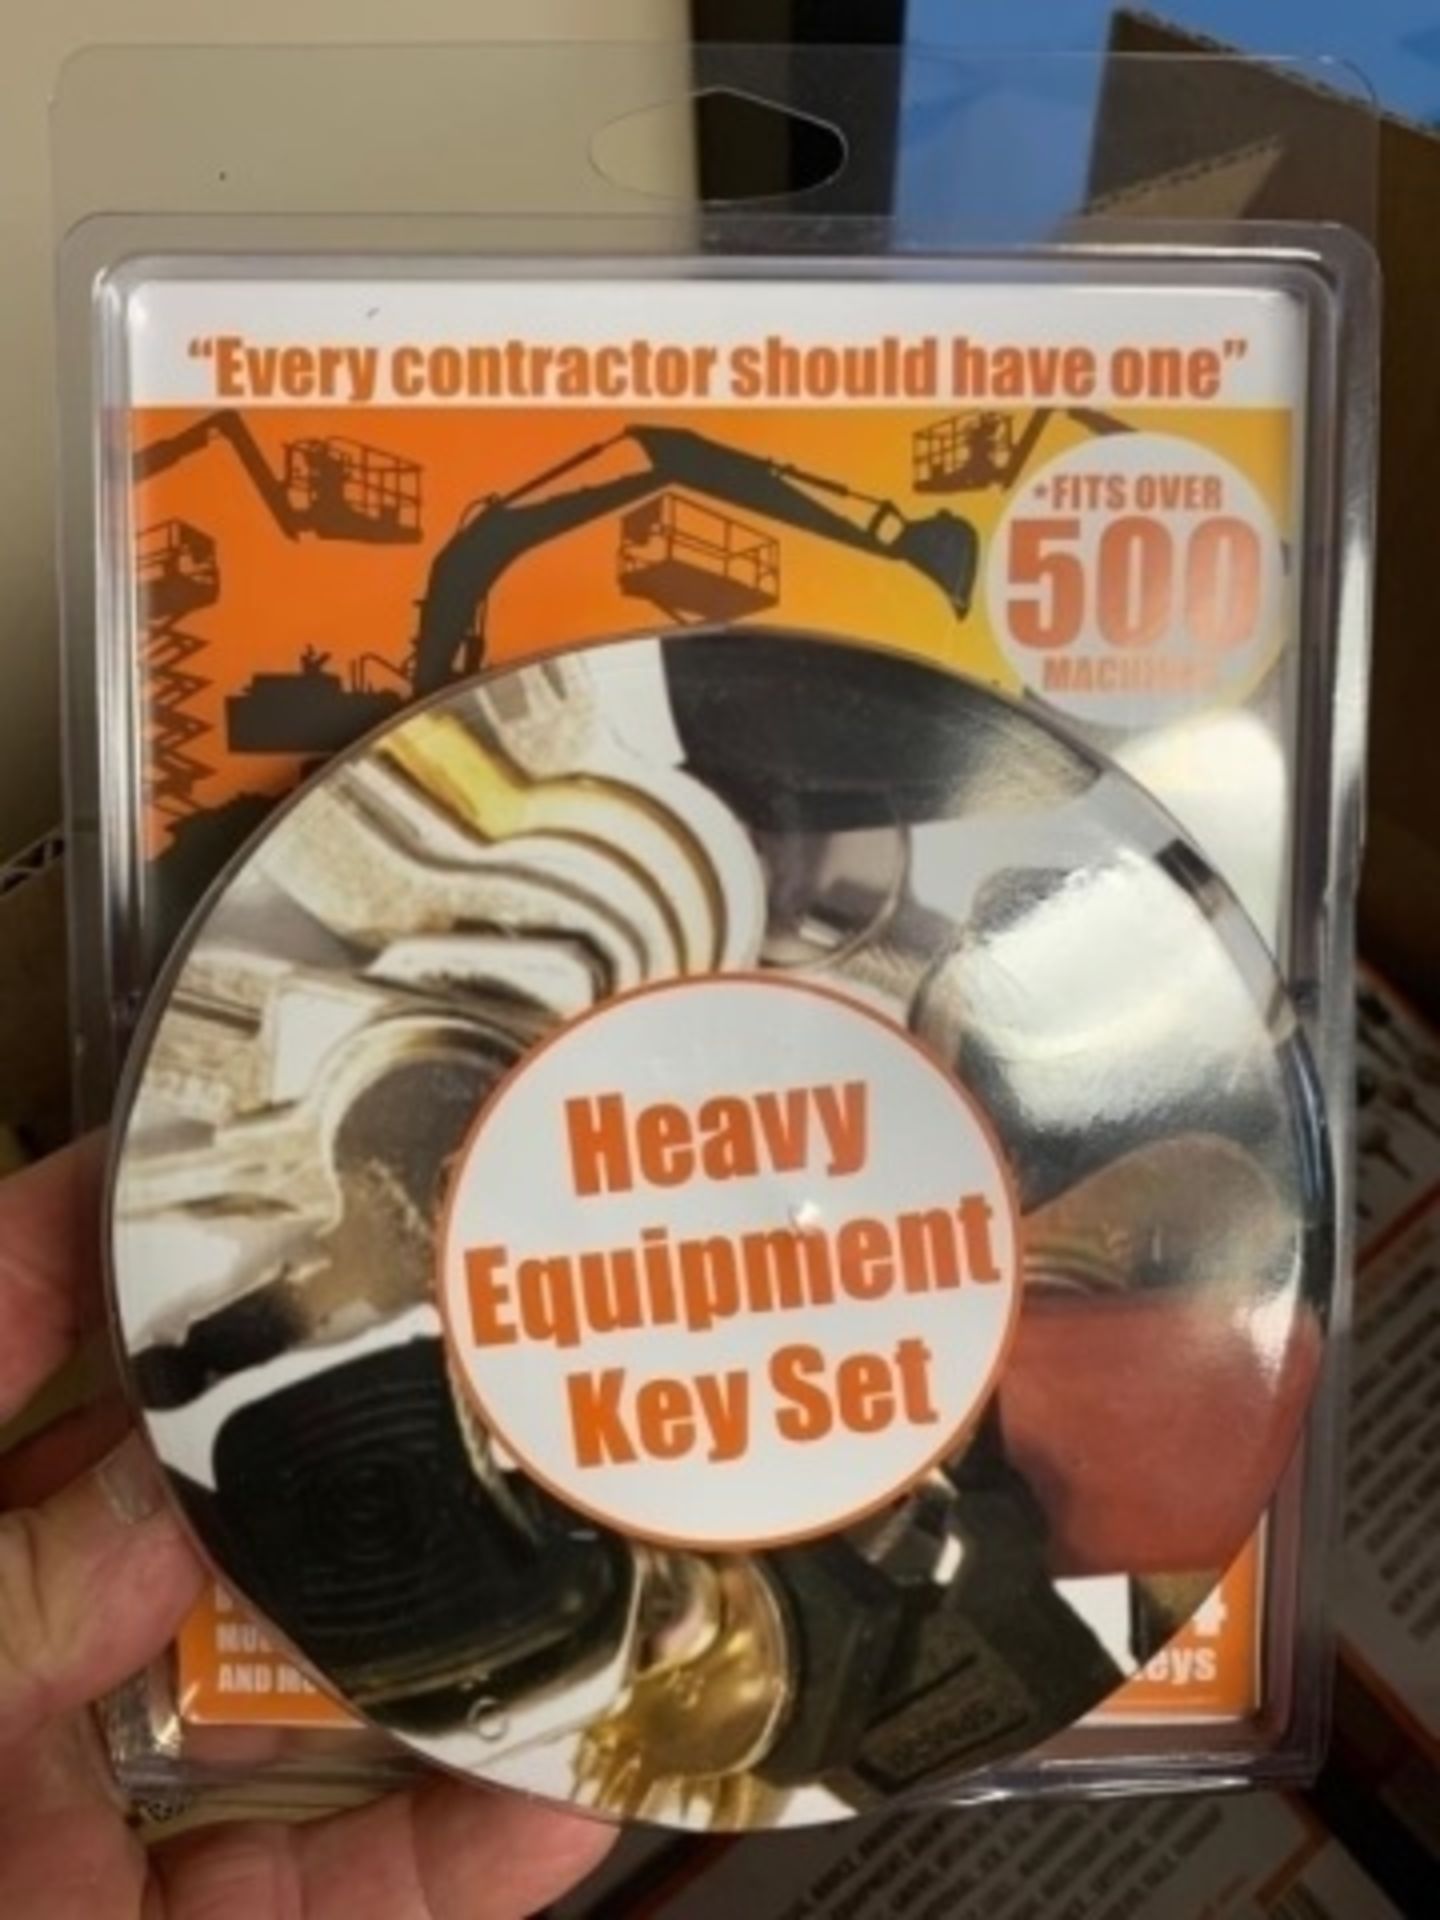 New Unused Heavy Equipment 24-Key Set, Fits Over 500 Different Machines - Image 3 of 8